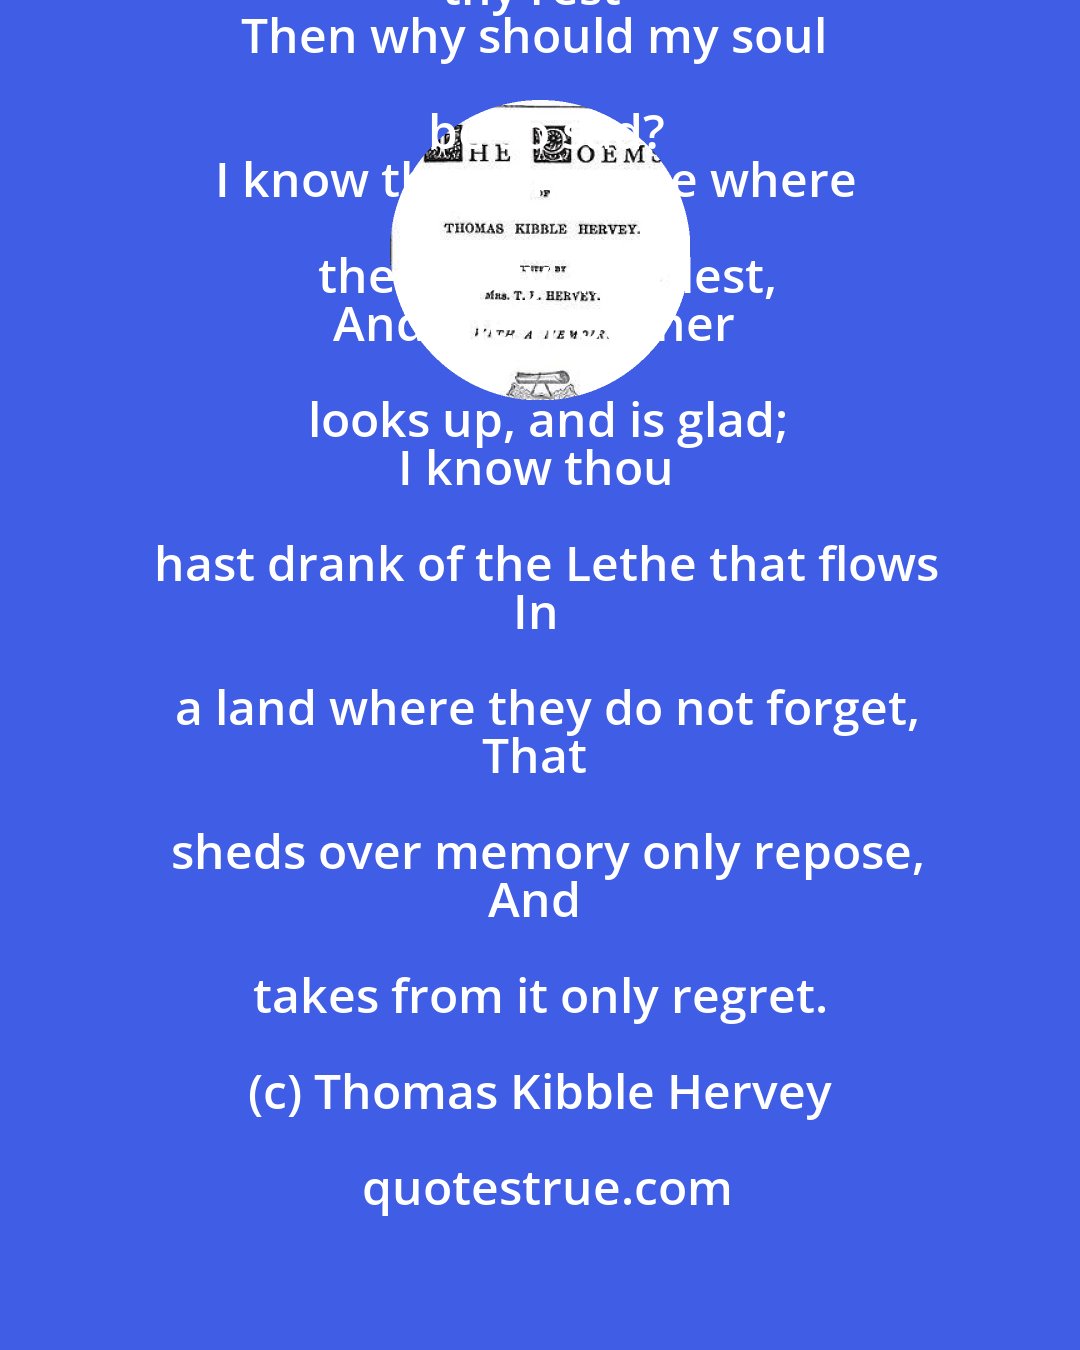 Thomas Kibble Hervey: I know thou art gone to the home of thy rest--
Then why should my soul be so sad?
I know thou art gone where the weary are blest,
And the mourner looks up, and is glad;
I know thou hast drank of the Lethe that flows
In a land where they do not forget,
That sheds over memory only repose,
And takes from it only regret.